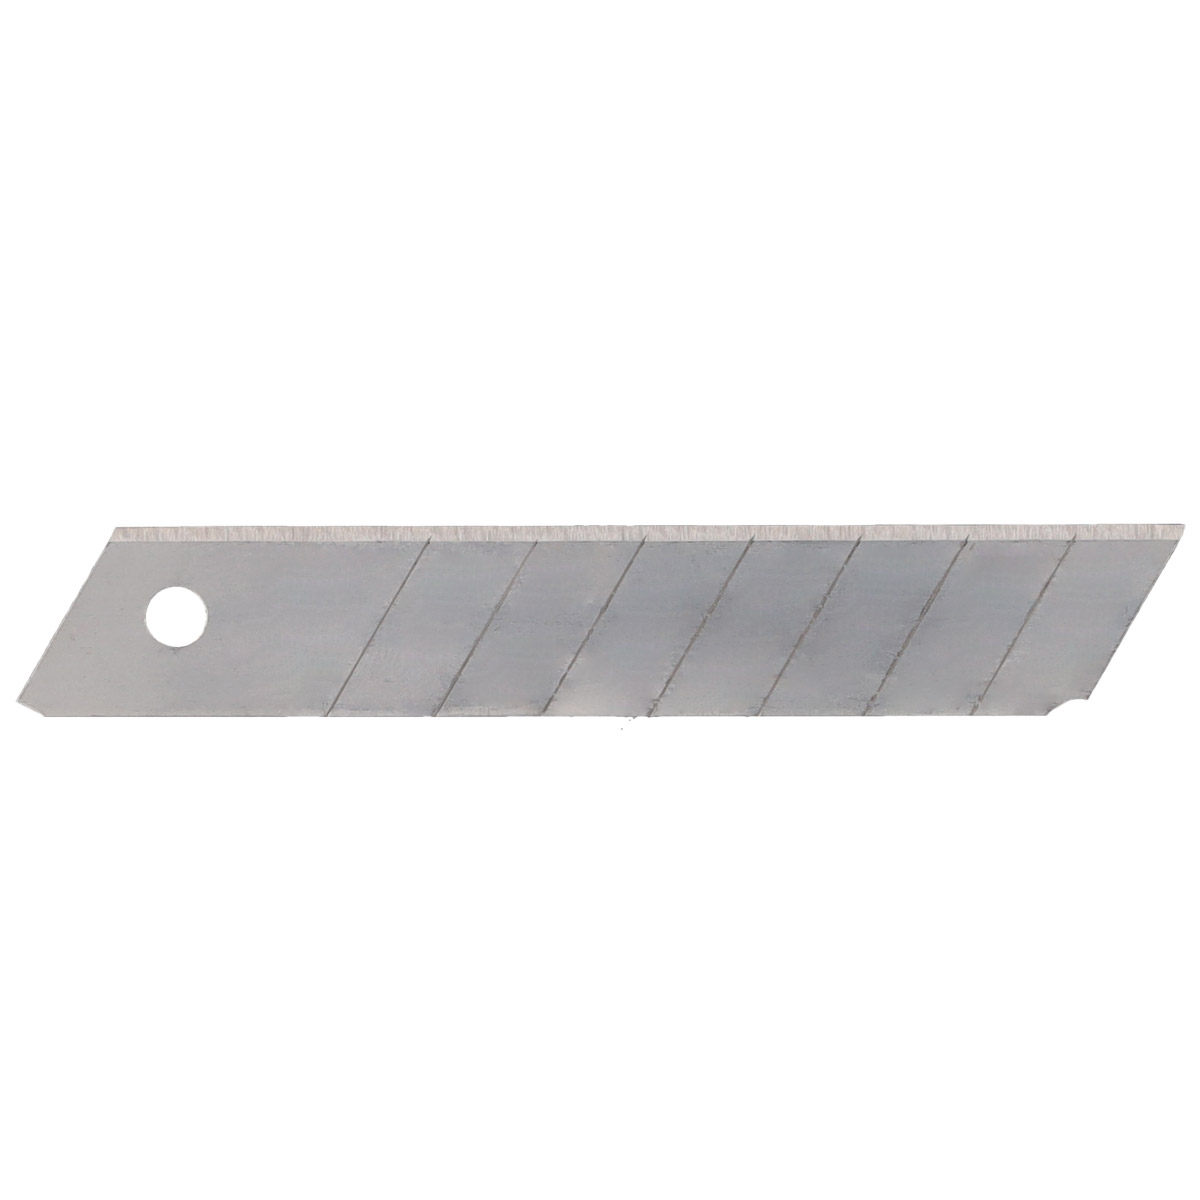 10 spare blades for ref. 002100456 - 675 - 502030001 - 03